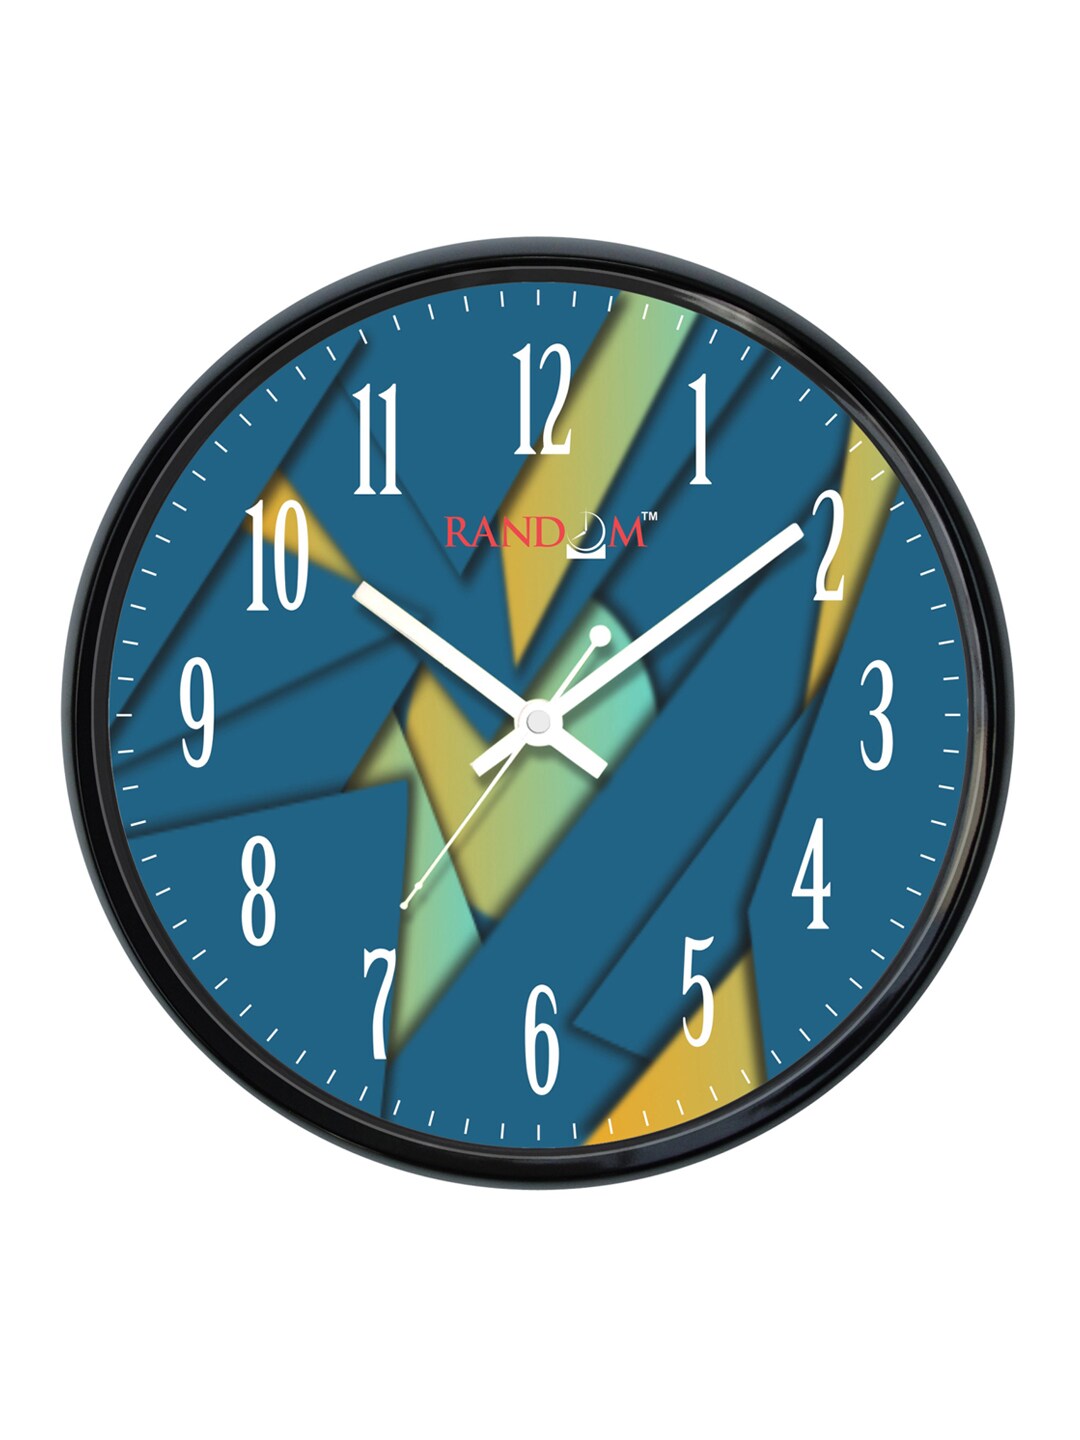 RANDOM Teal Round Printed Analogue Wall Clock Price in India